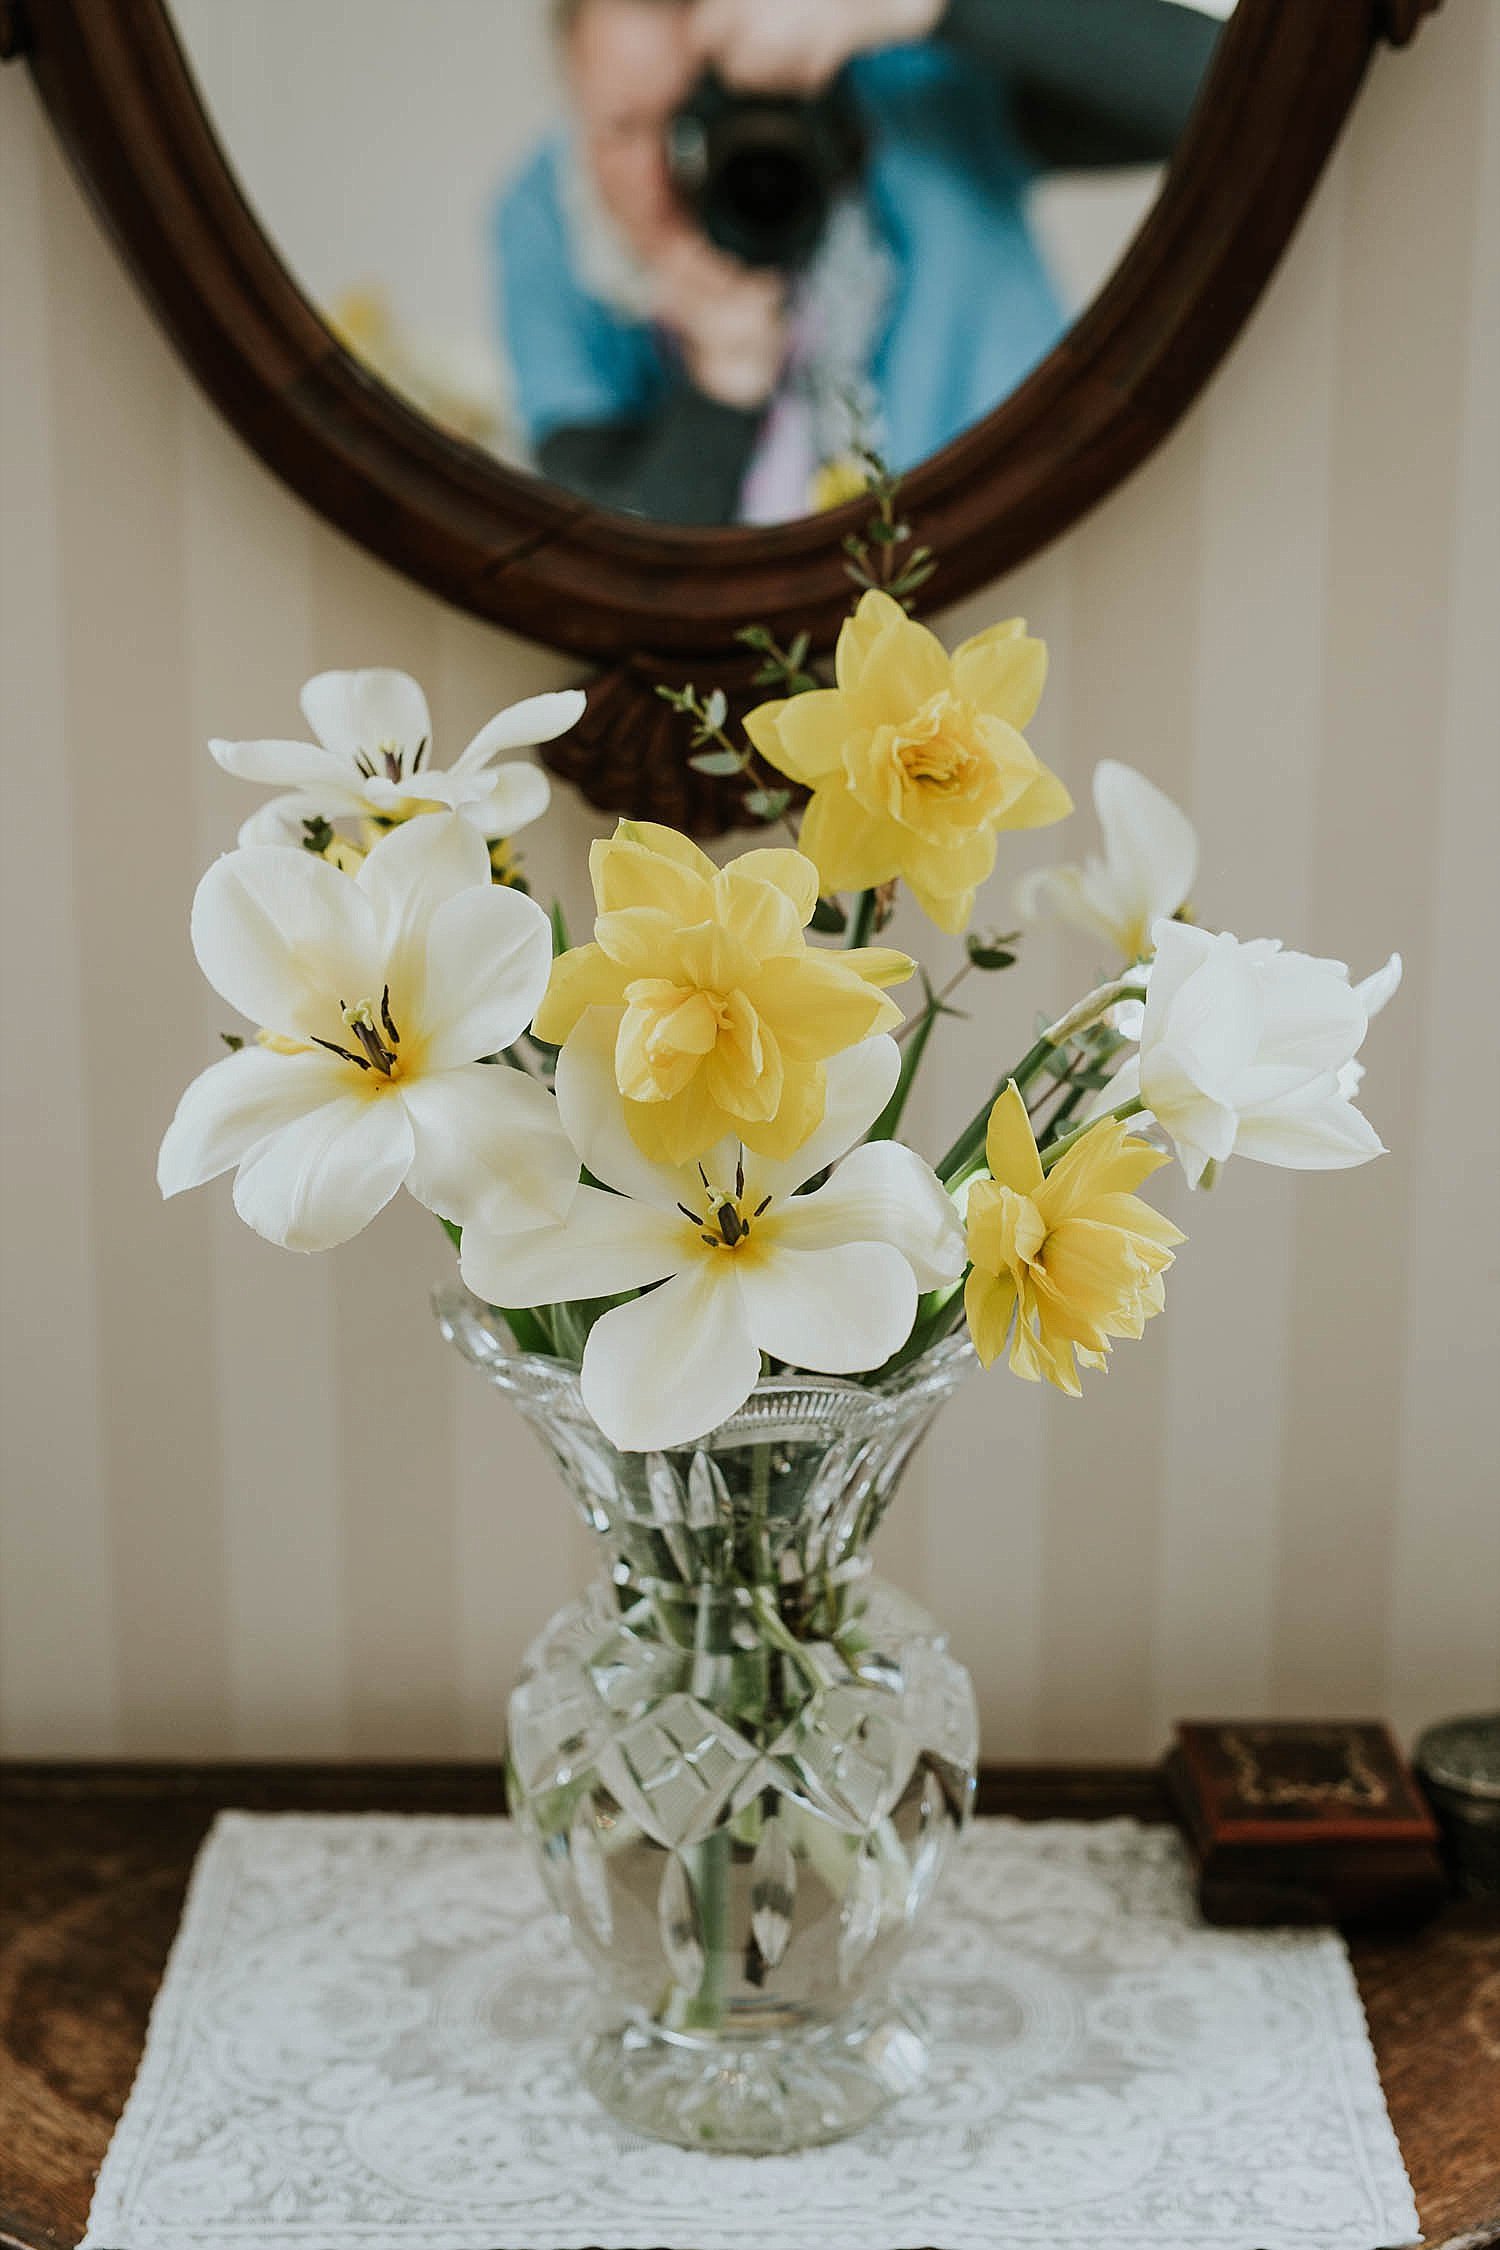 bouquet of yellow and white flowers in crystal glass vase | Denmark wedding planners and florist